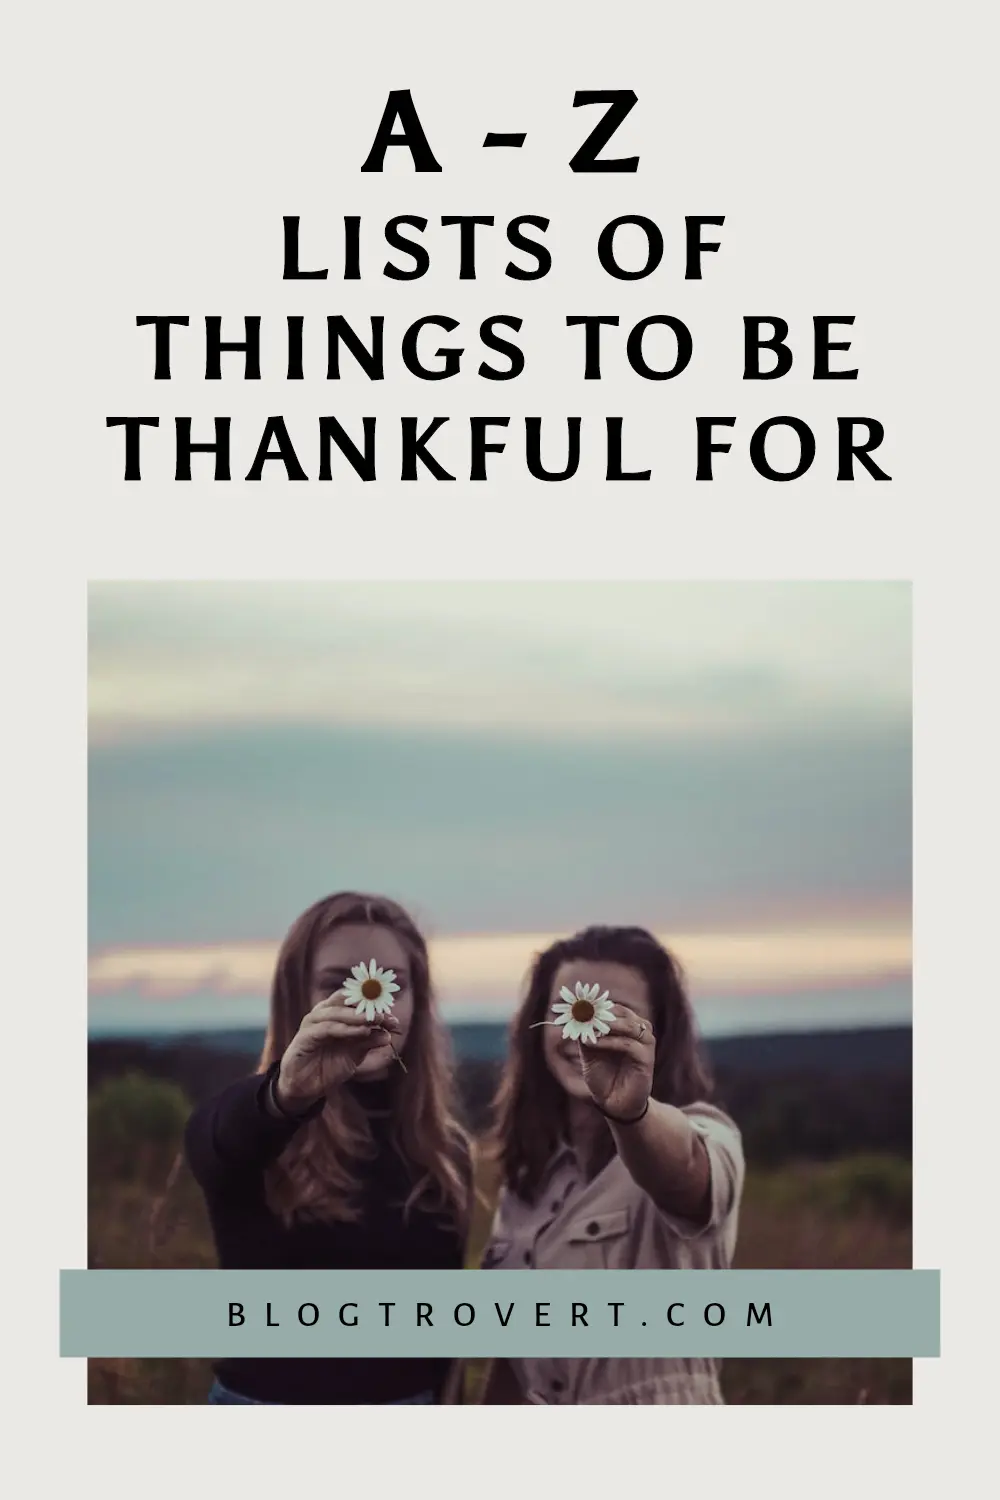 A-Z Unique Gratitude List Ideas - 100 things to be thankful for everyday 4